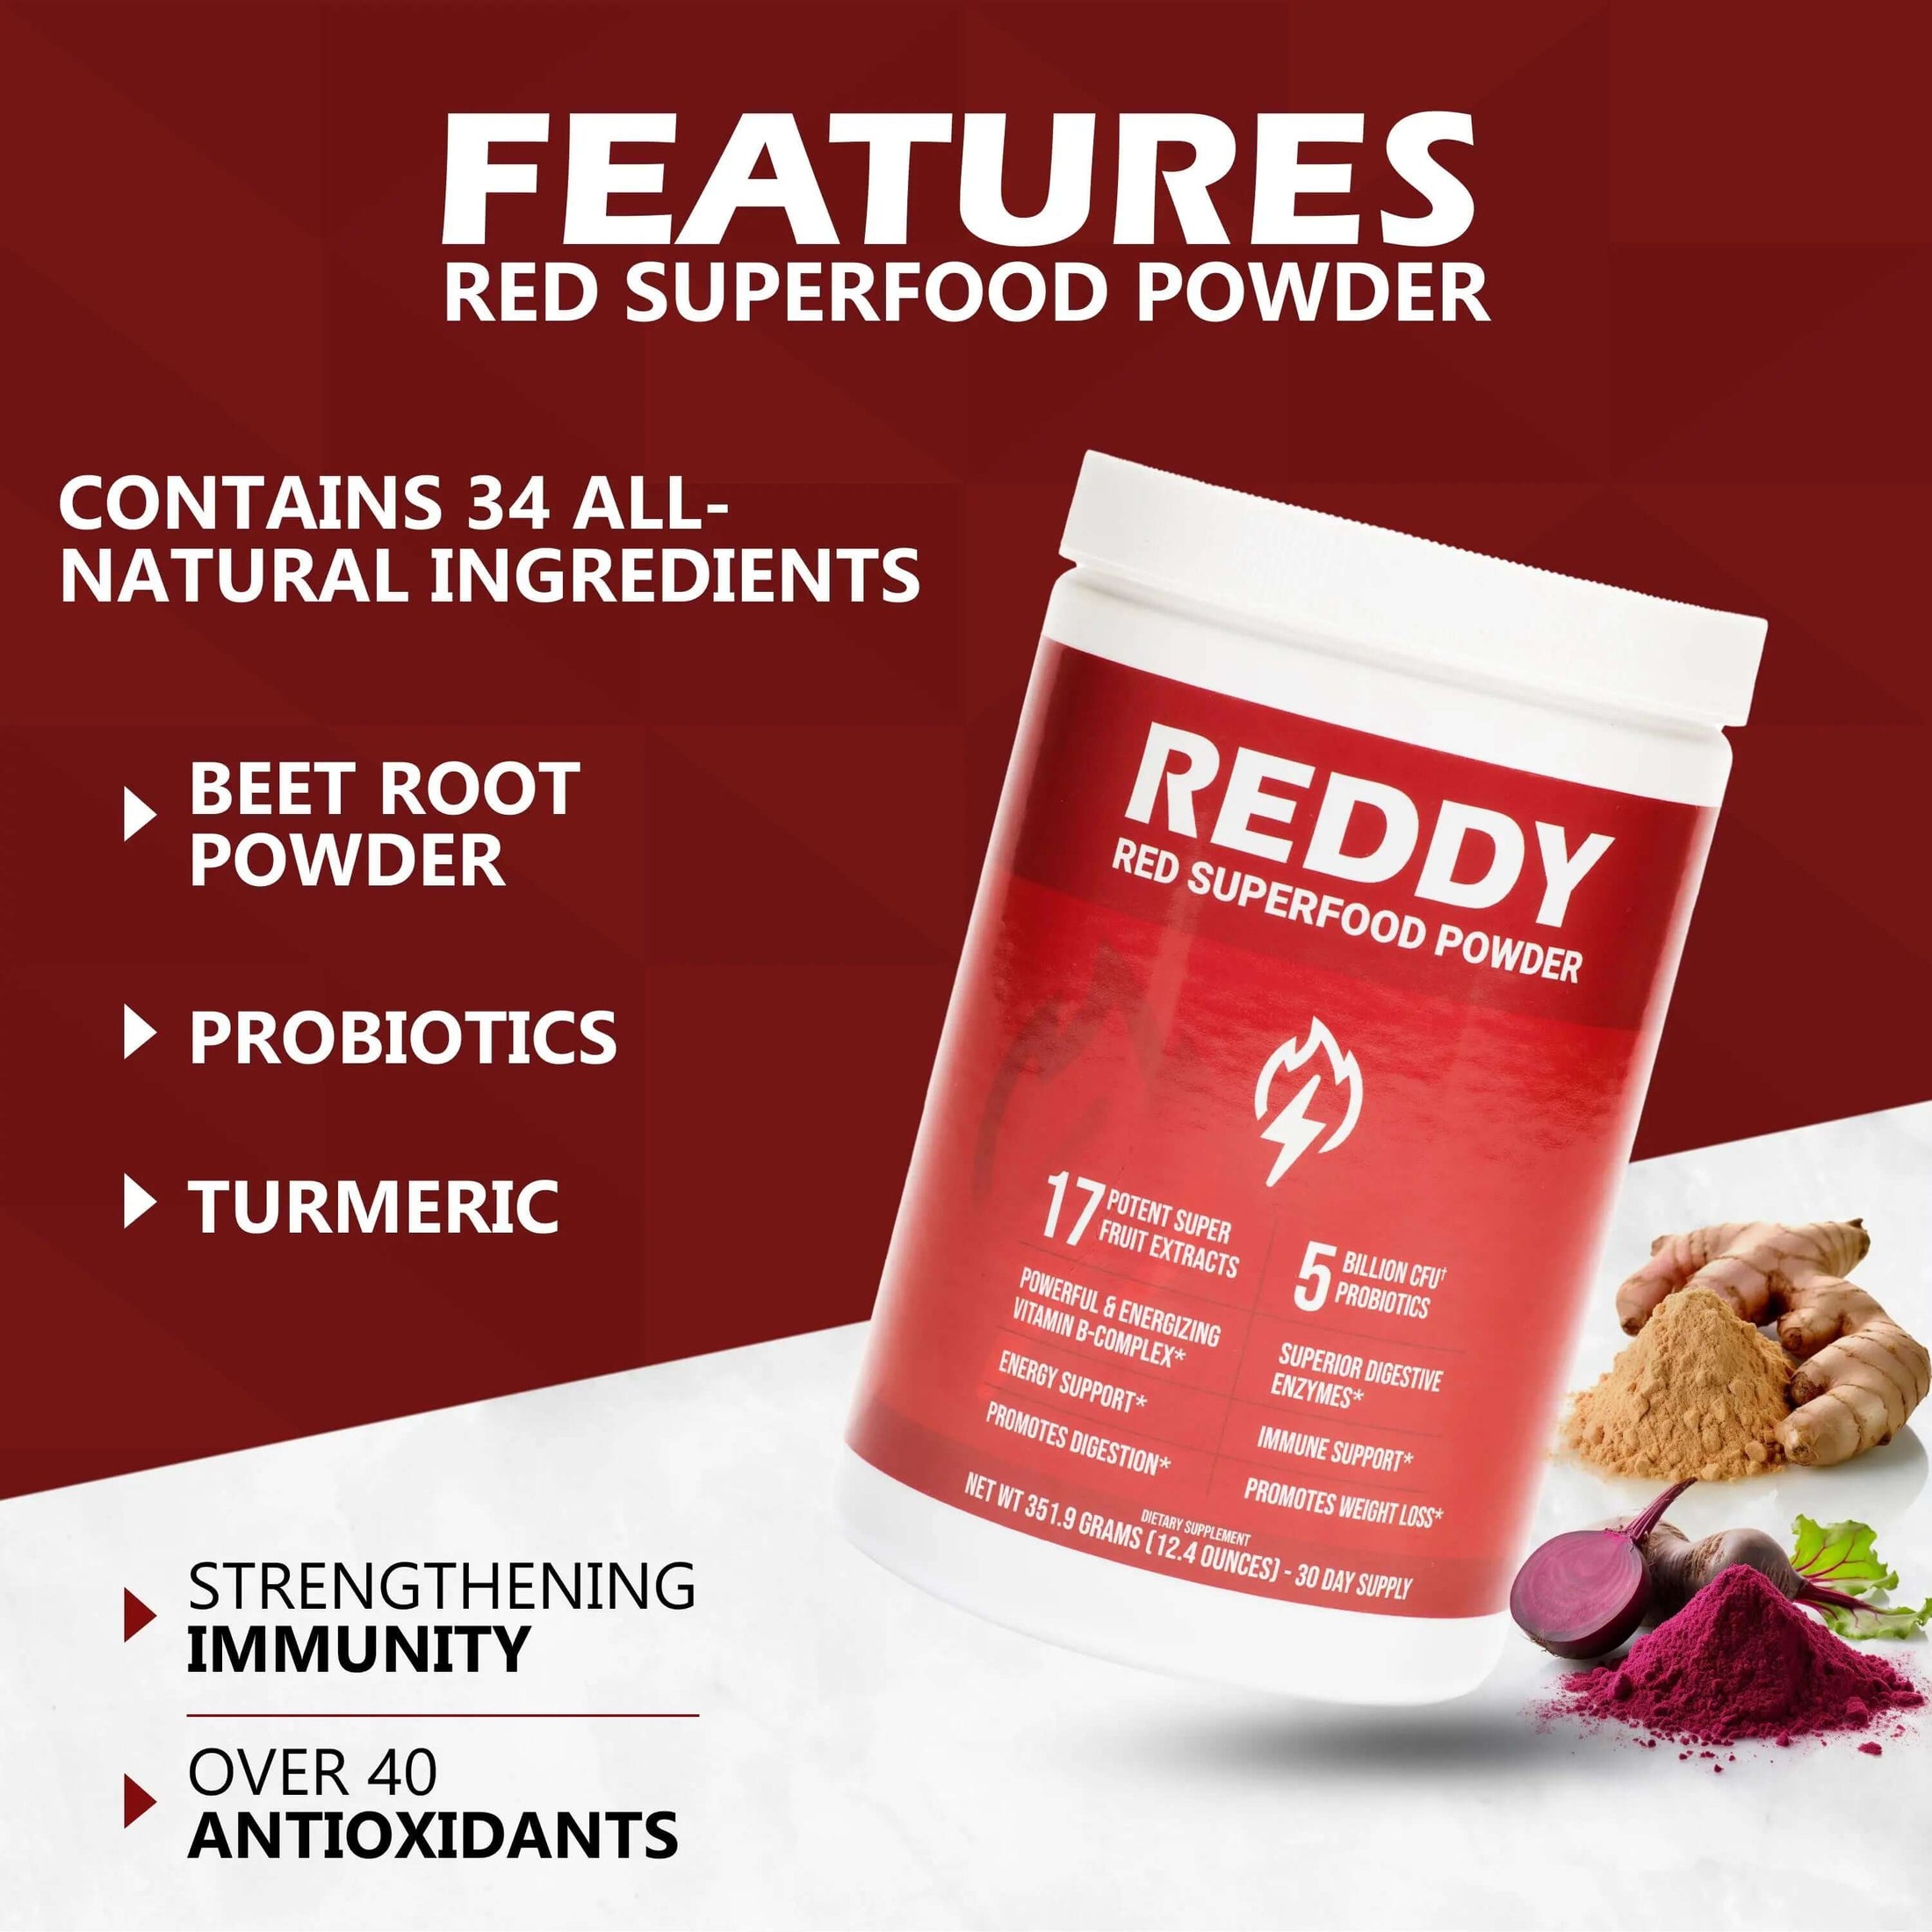 Detailed image highlighting the key features of Reddy Red Organic Superfood Powder, including organic certification and no added sugars, displayed on a visually appealing infographic background.